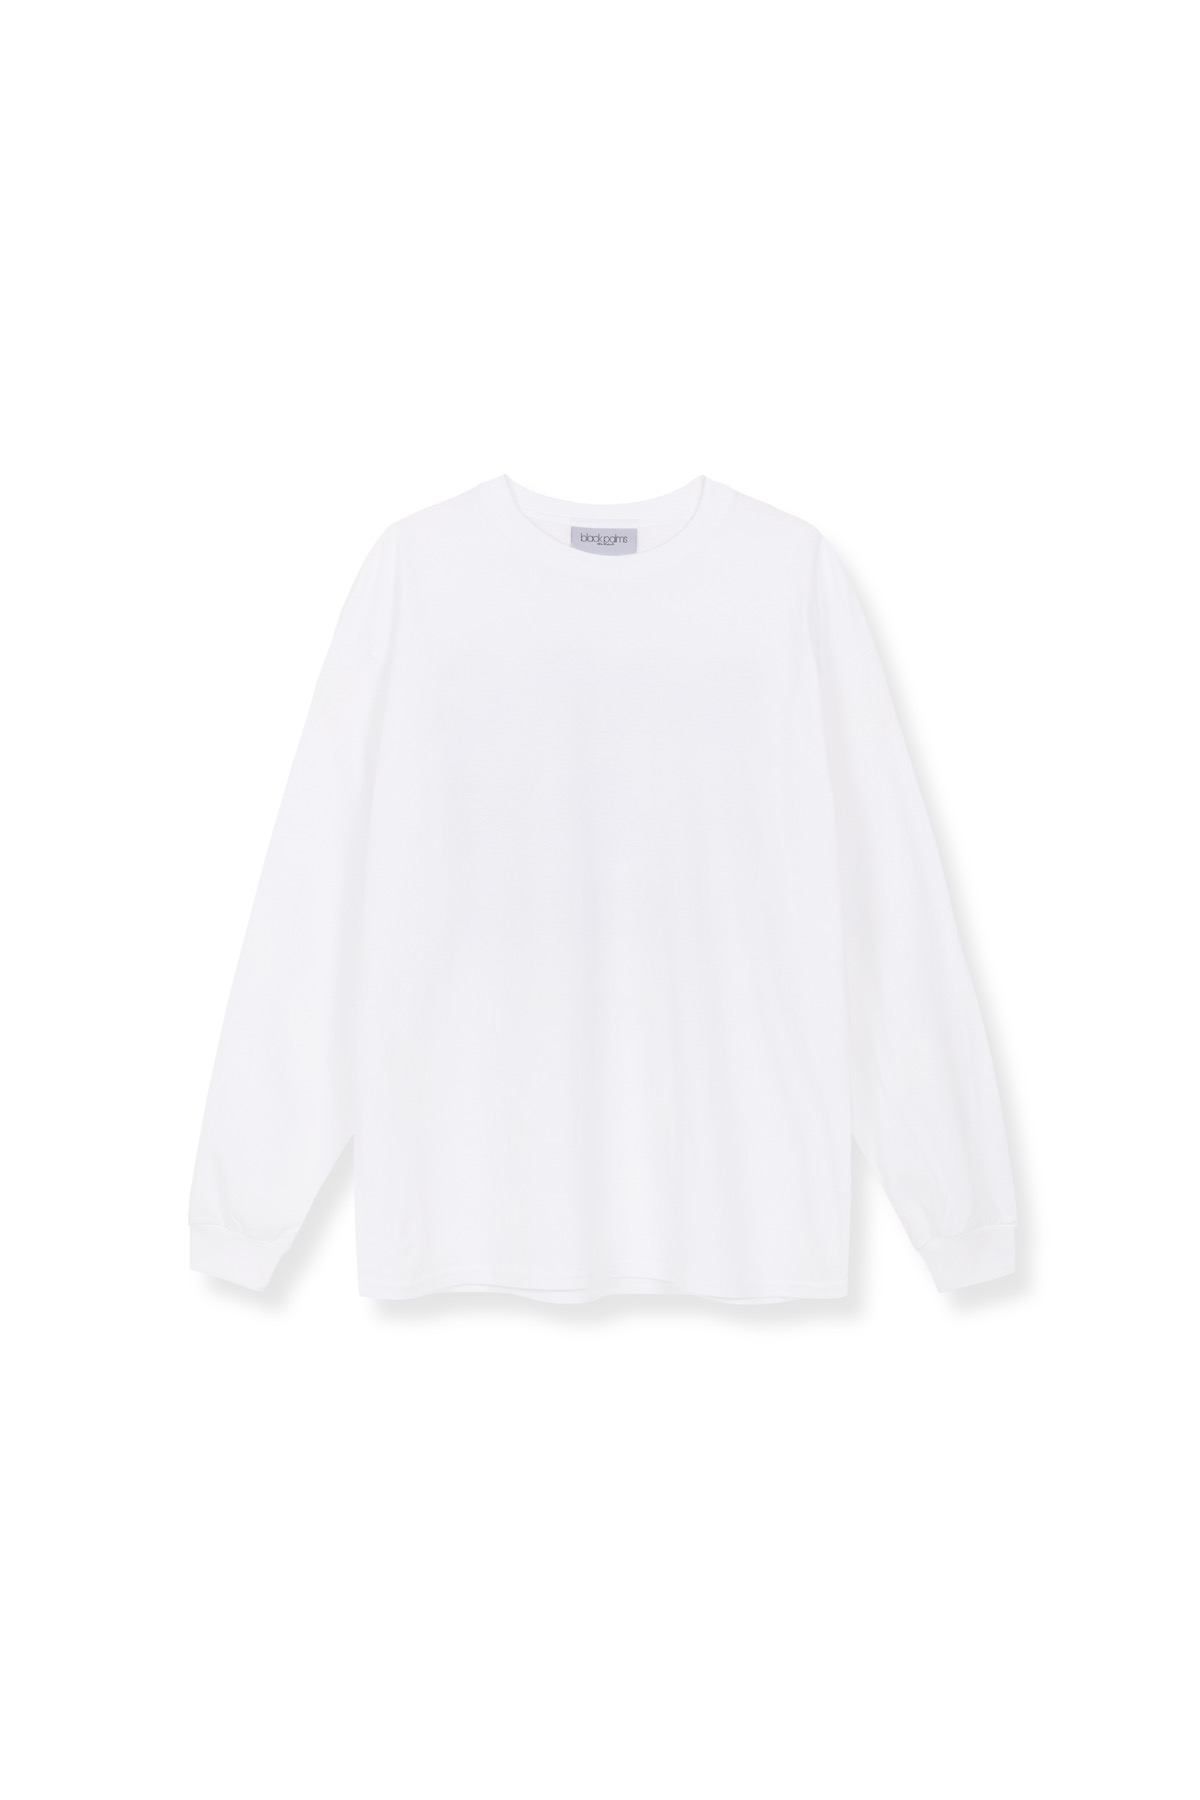 OBVIOUSLY OVERSIZED Long Tee White